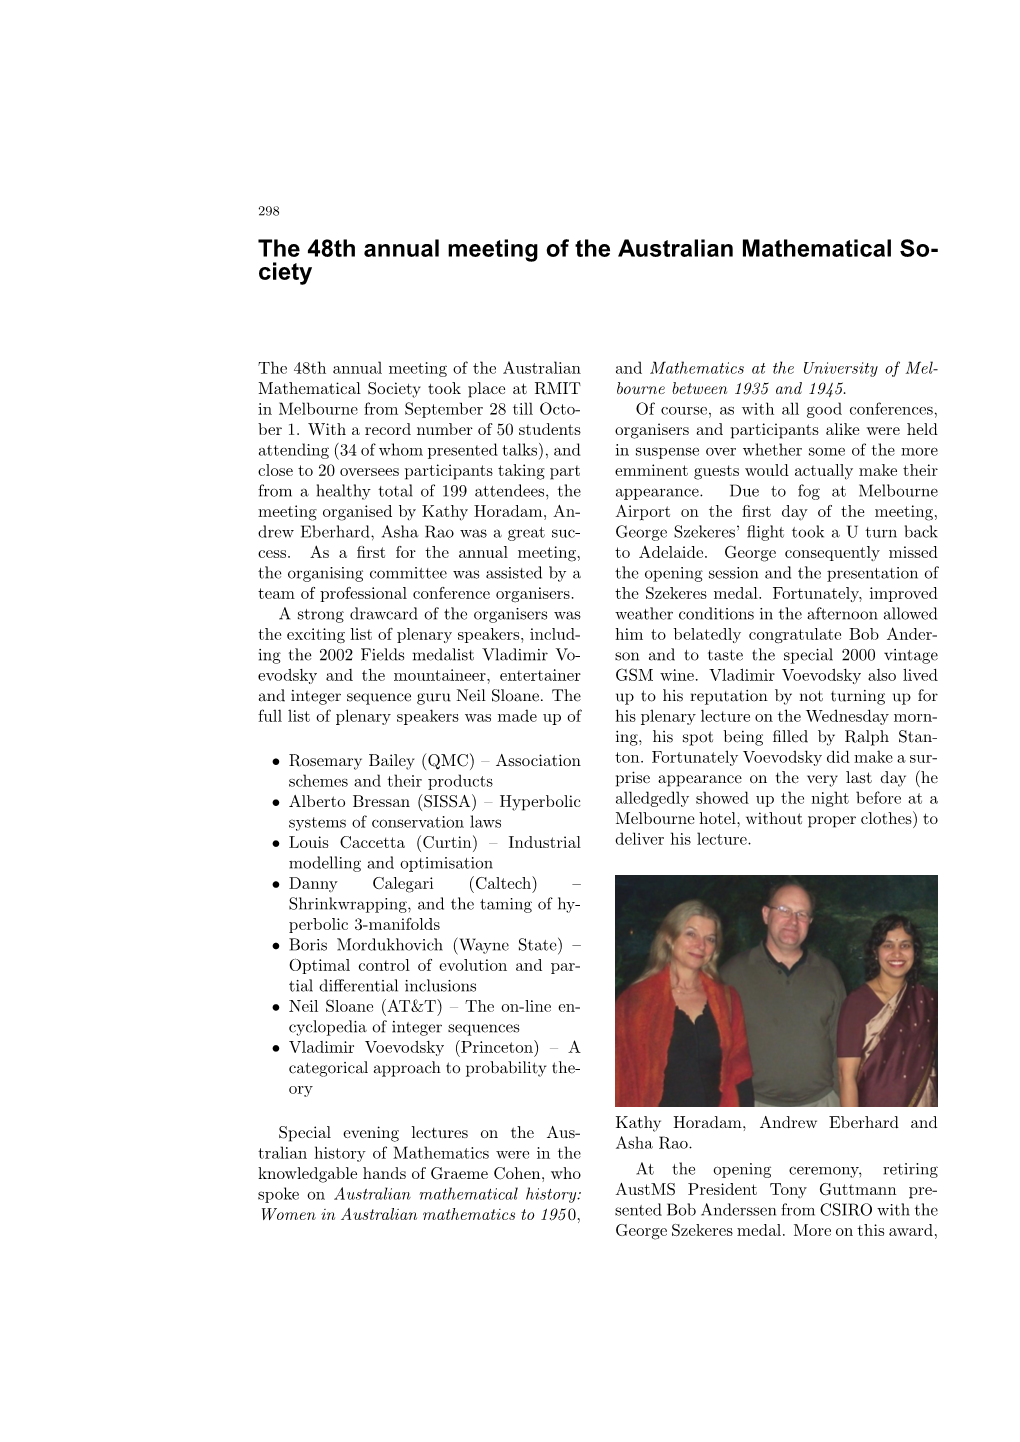 The 48Th Annual Meeting of the Australian Mathematical Society